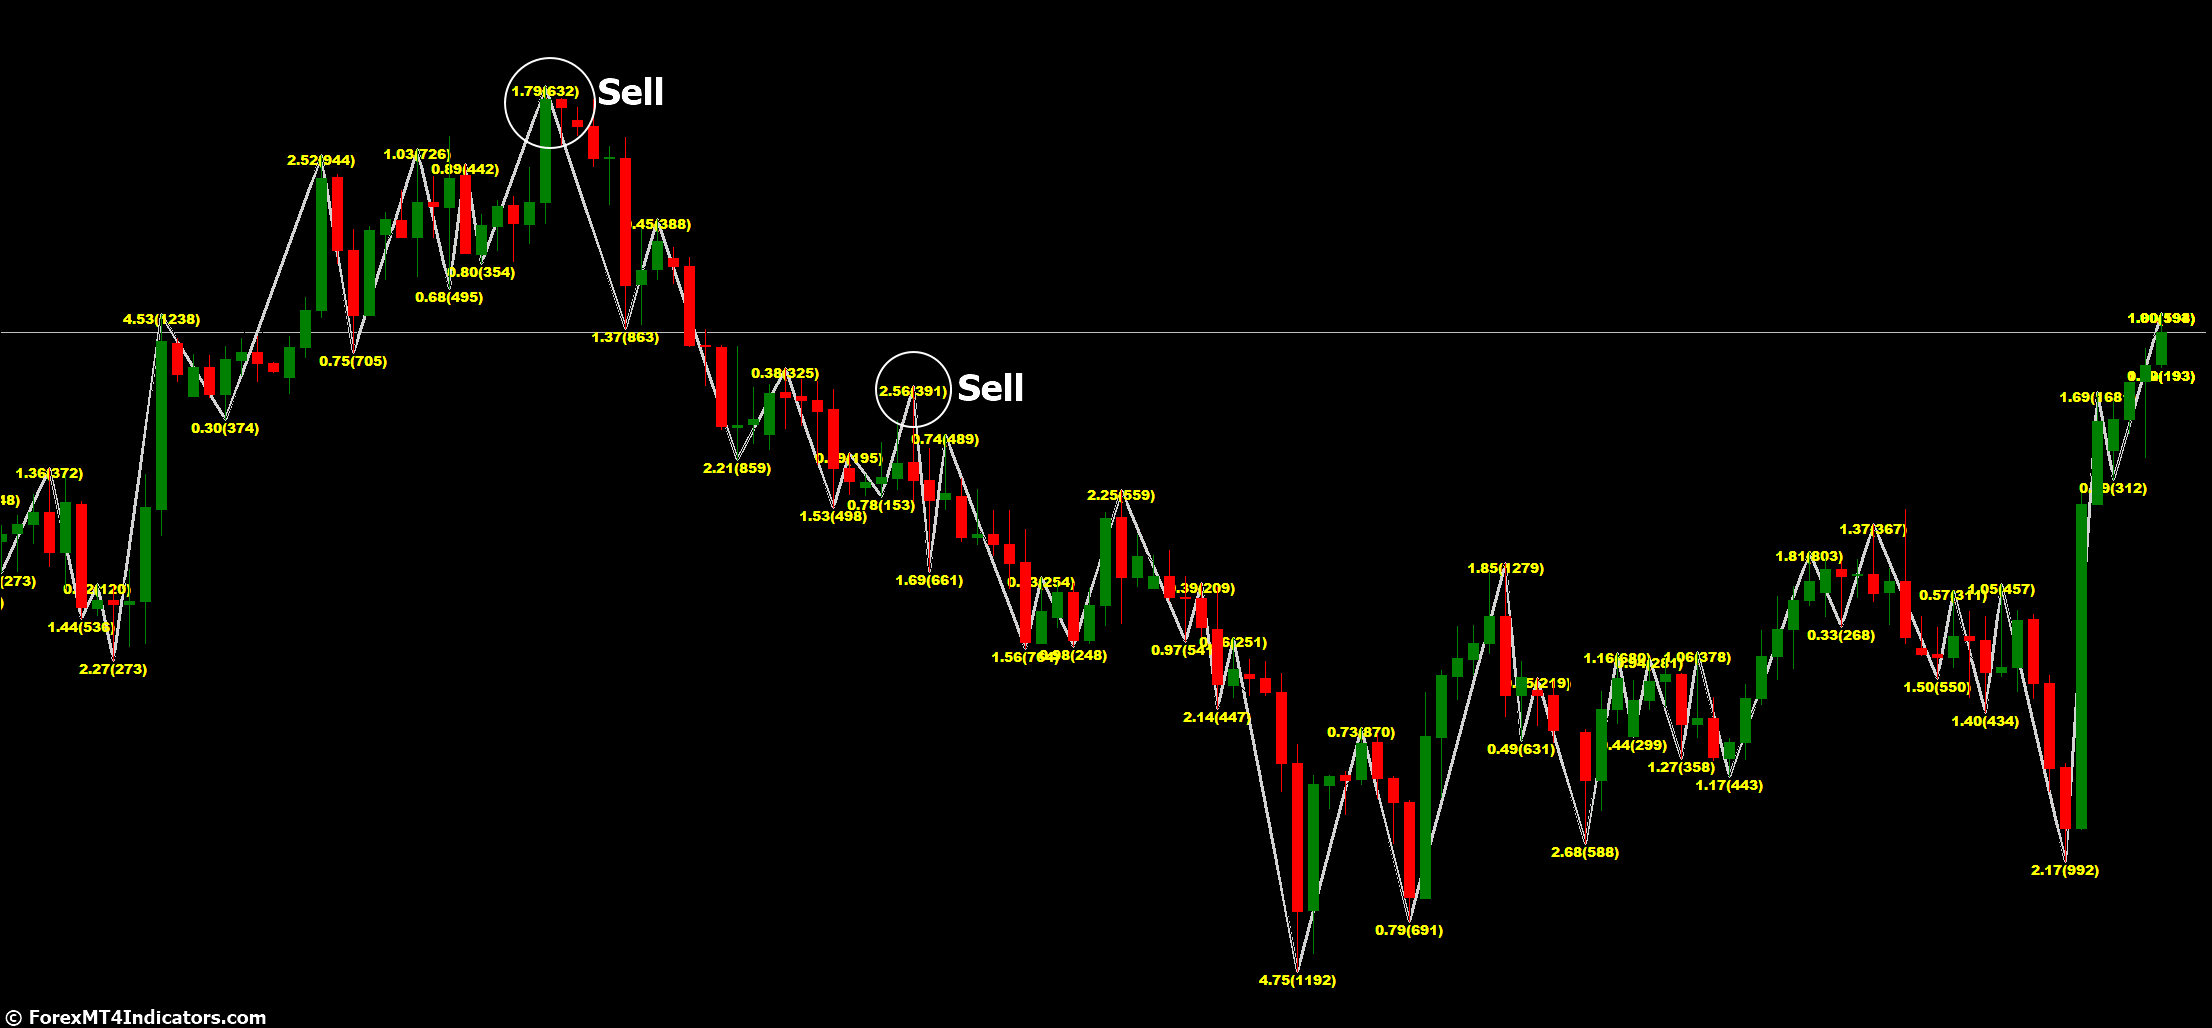 How to Trade with Channel ZZ MT4 Indicator - Sell Entry